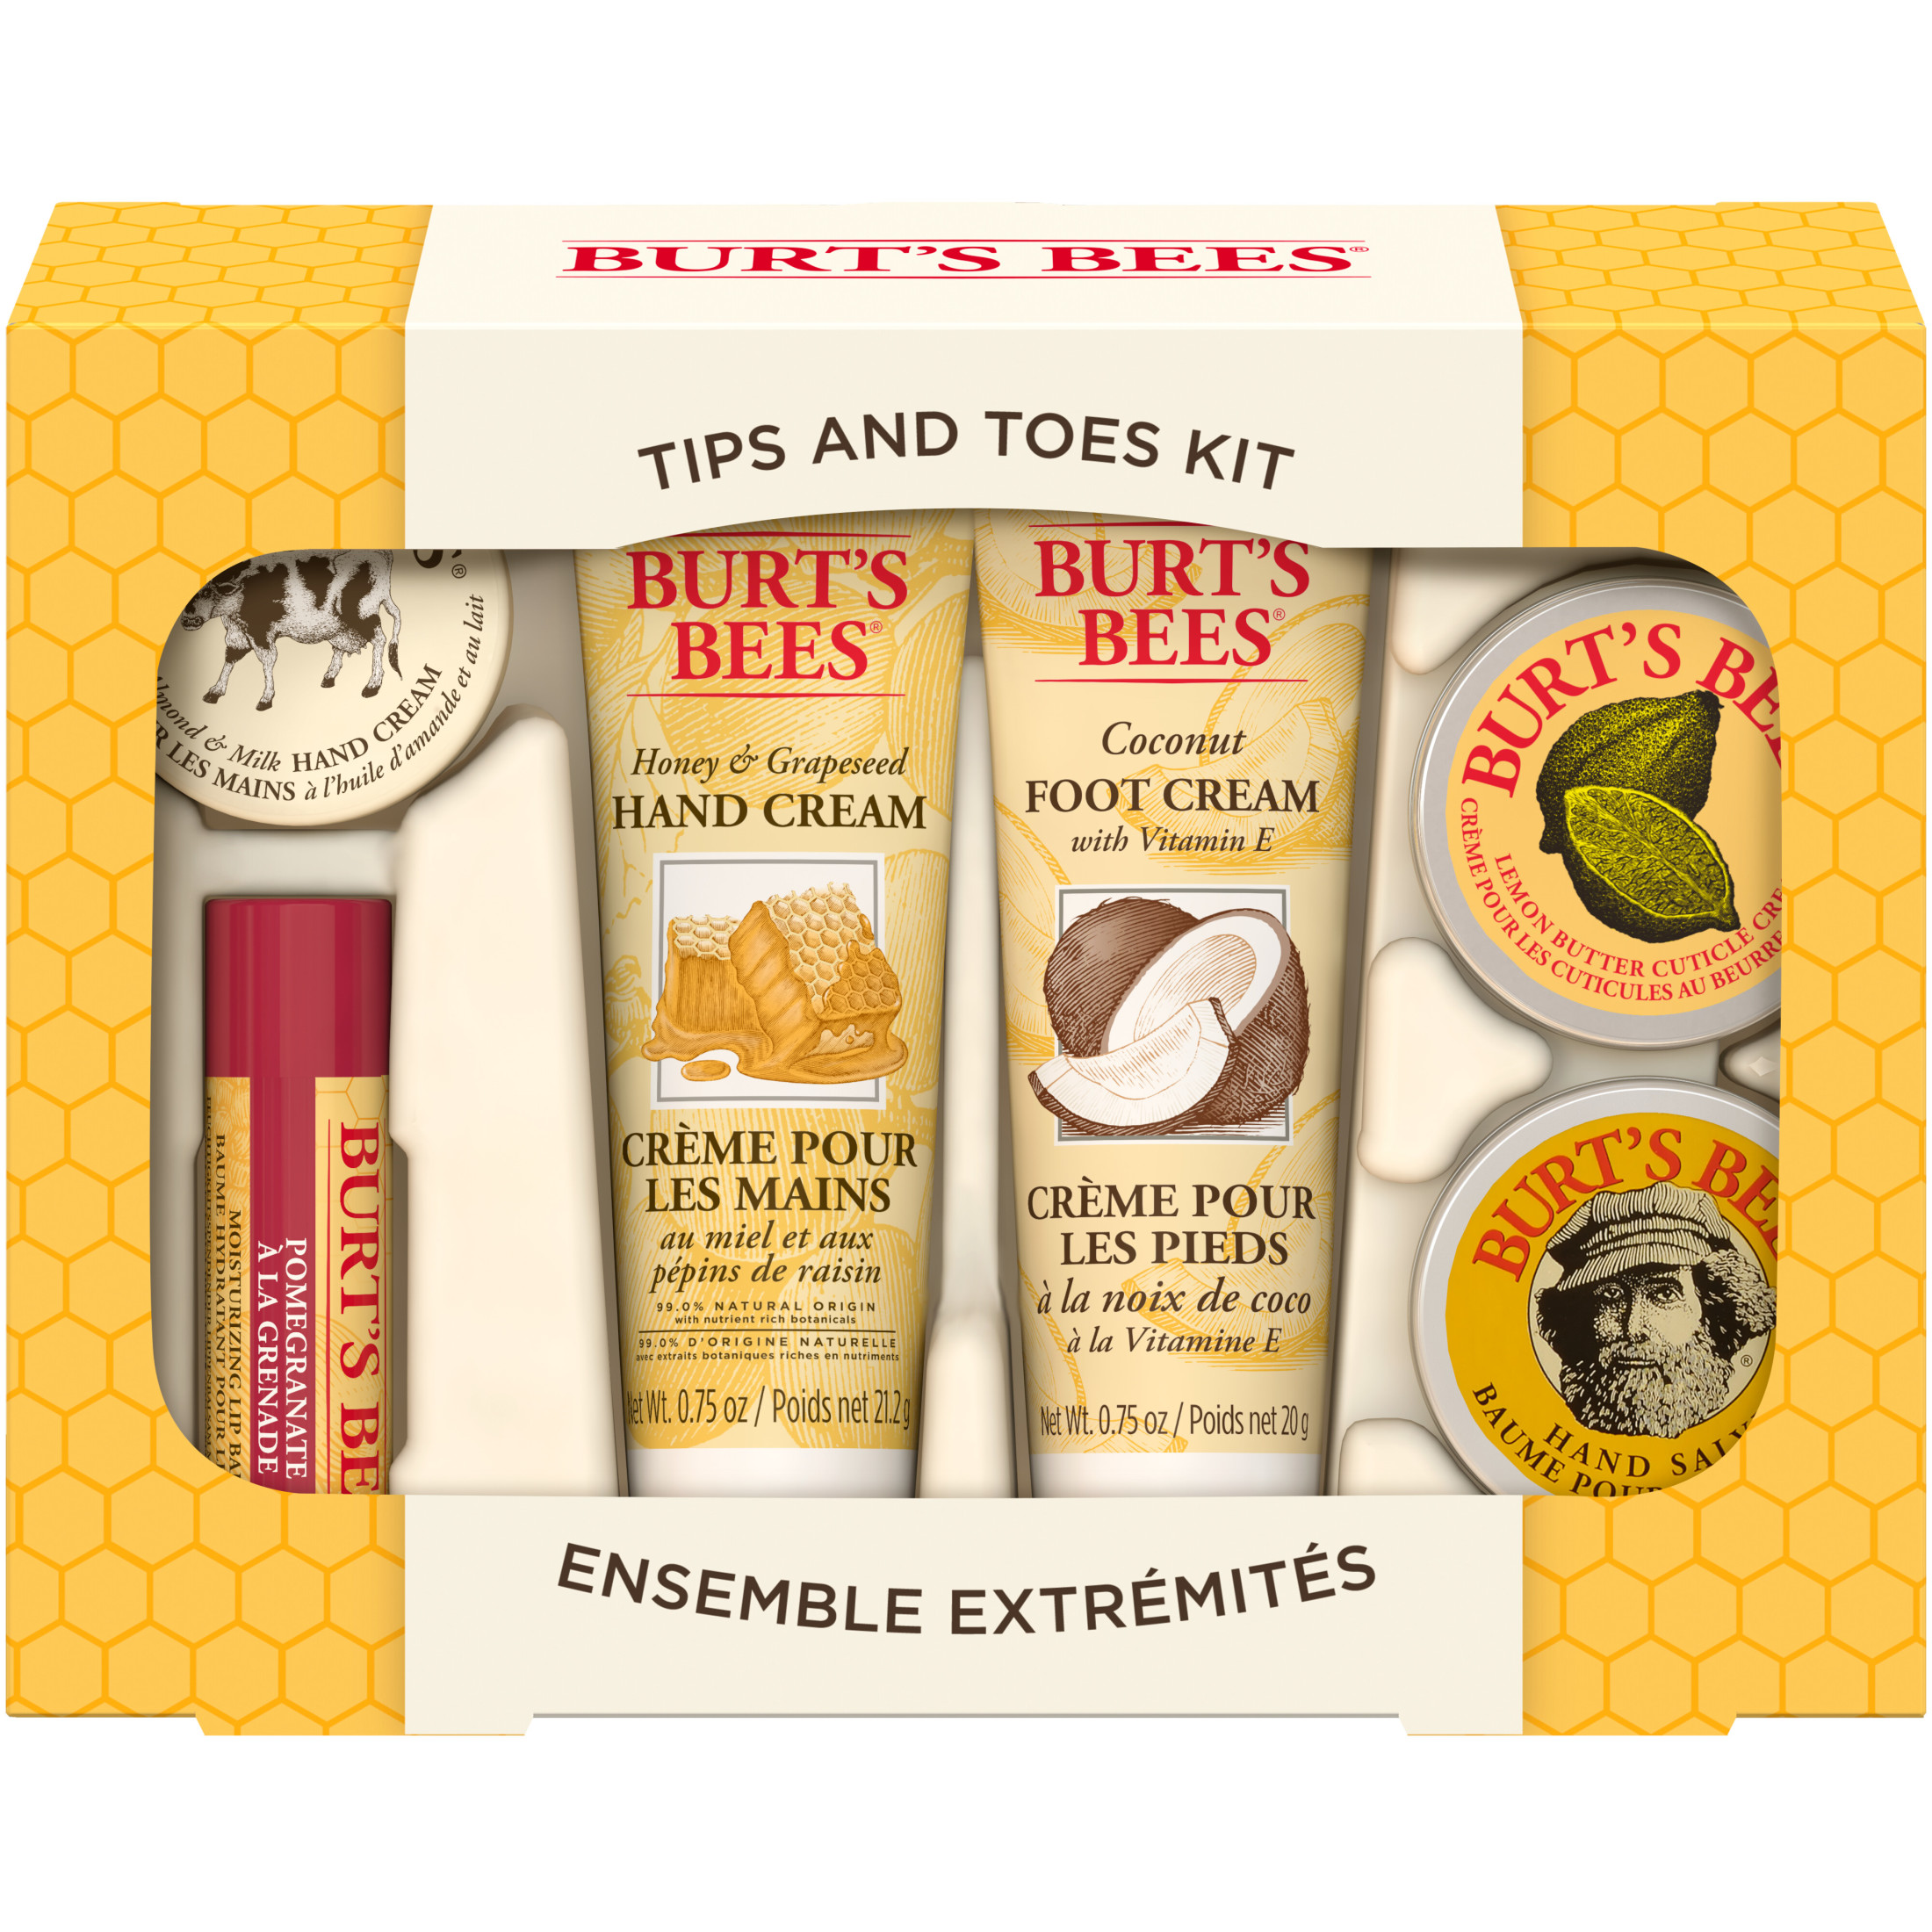 Burt's Bees Tips and Toes Kit Travel Beauty Gift Set, 6 Piece Travel Size Set - image 1 of 9